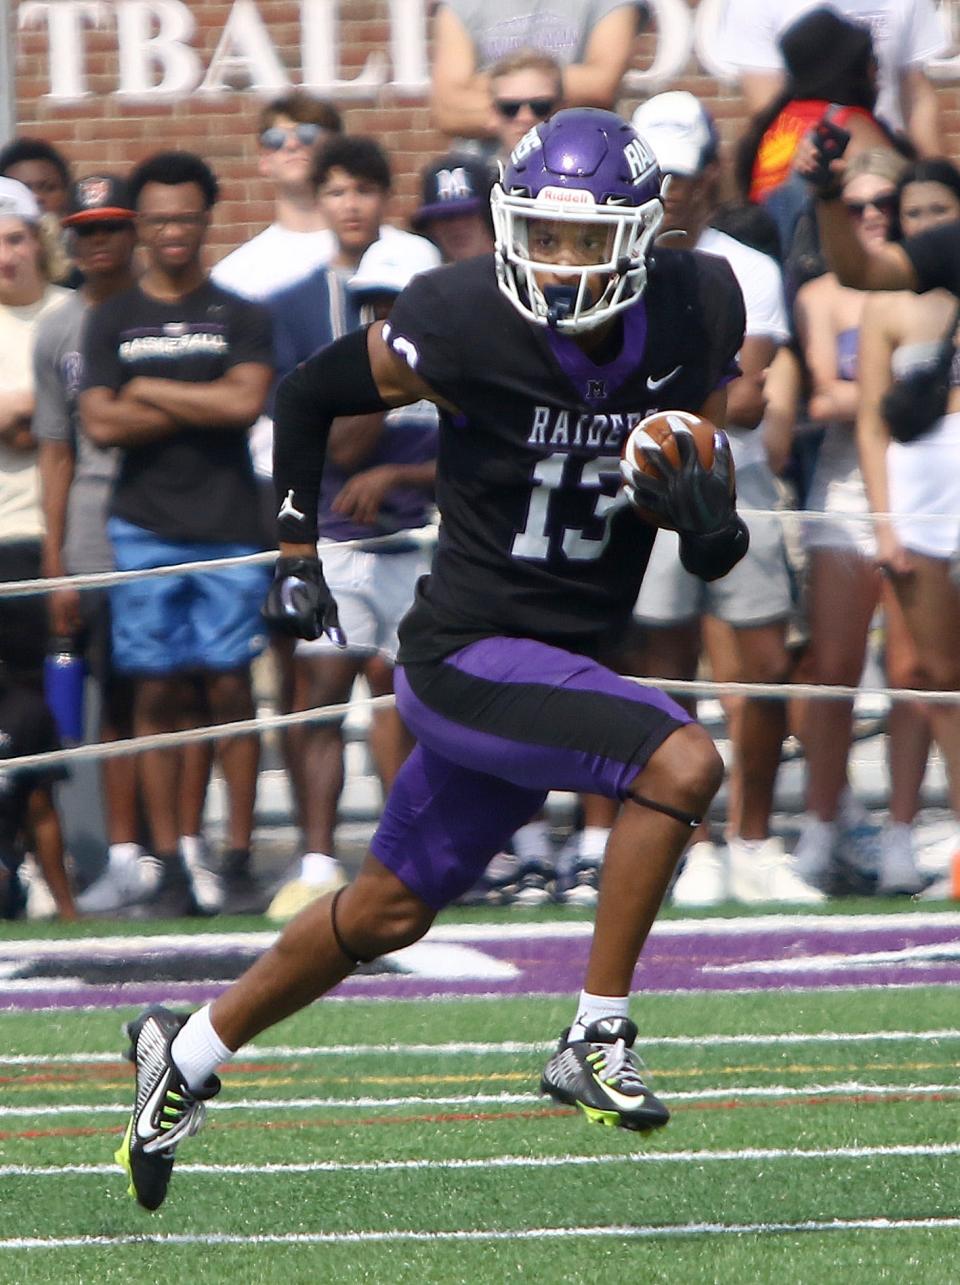 Josh Jones is tied for the Mount Union team lead with one interception. The Purple Raiders are first in NCAA Division III, allowing just 96.4 yards passing per game.